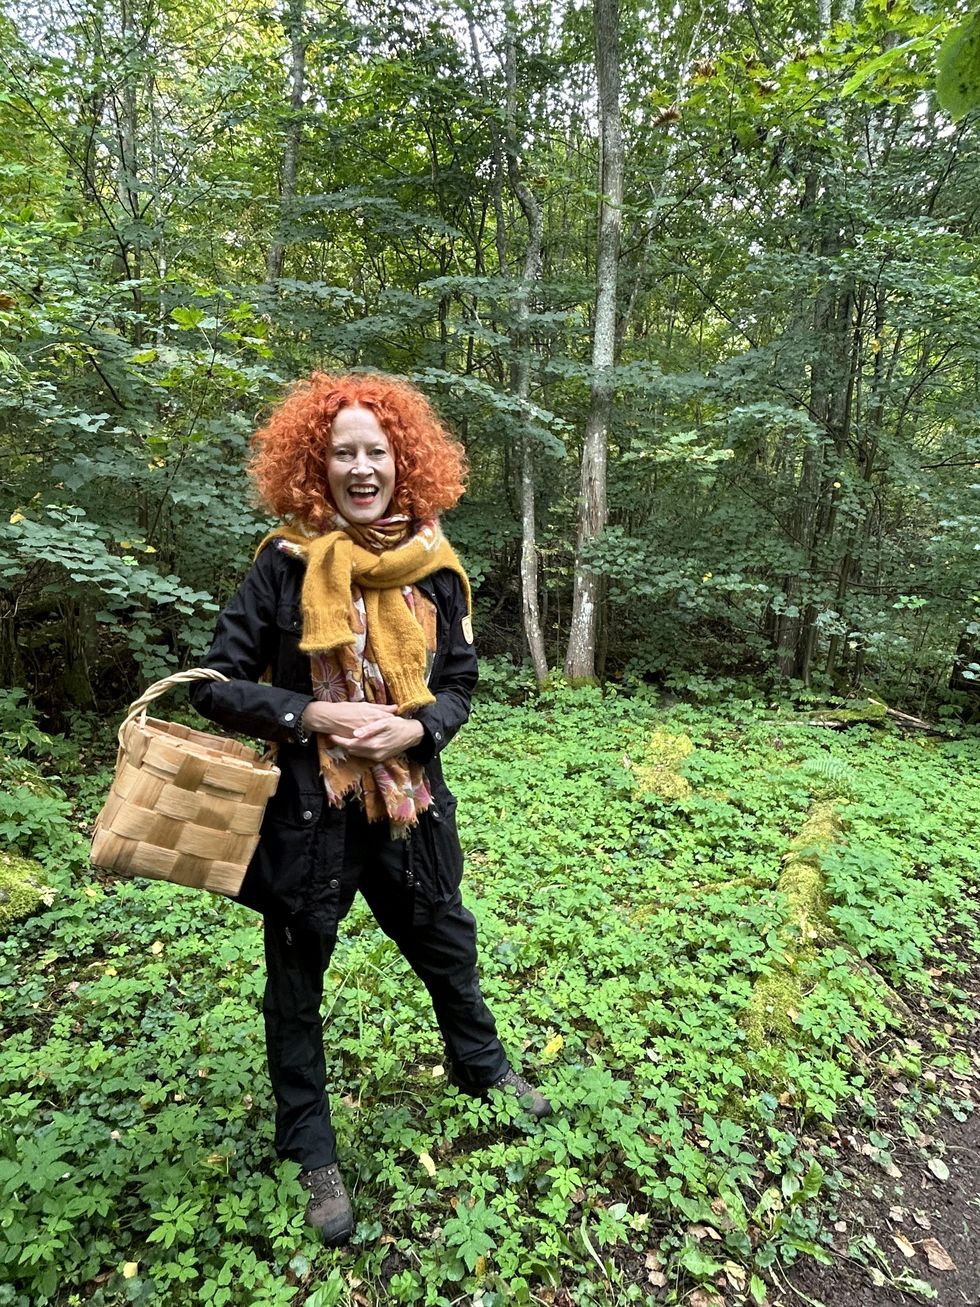 a person with red hair and a bag walking through a forest